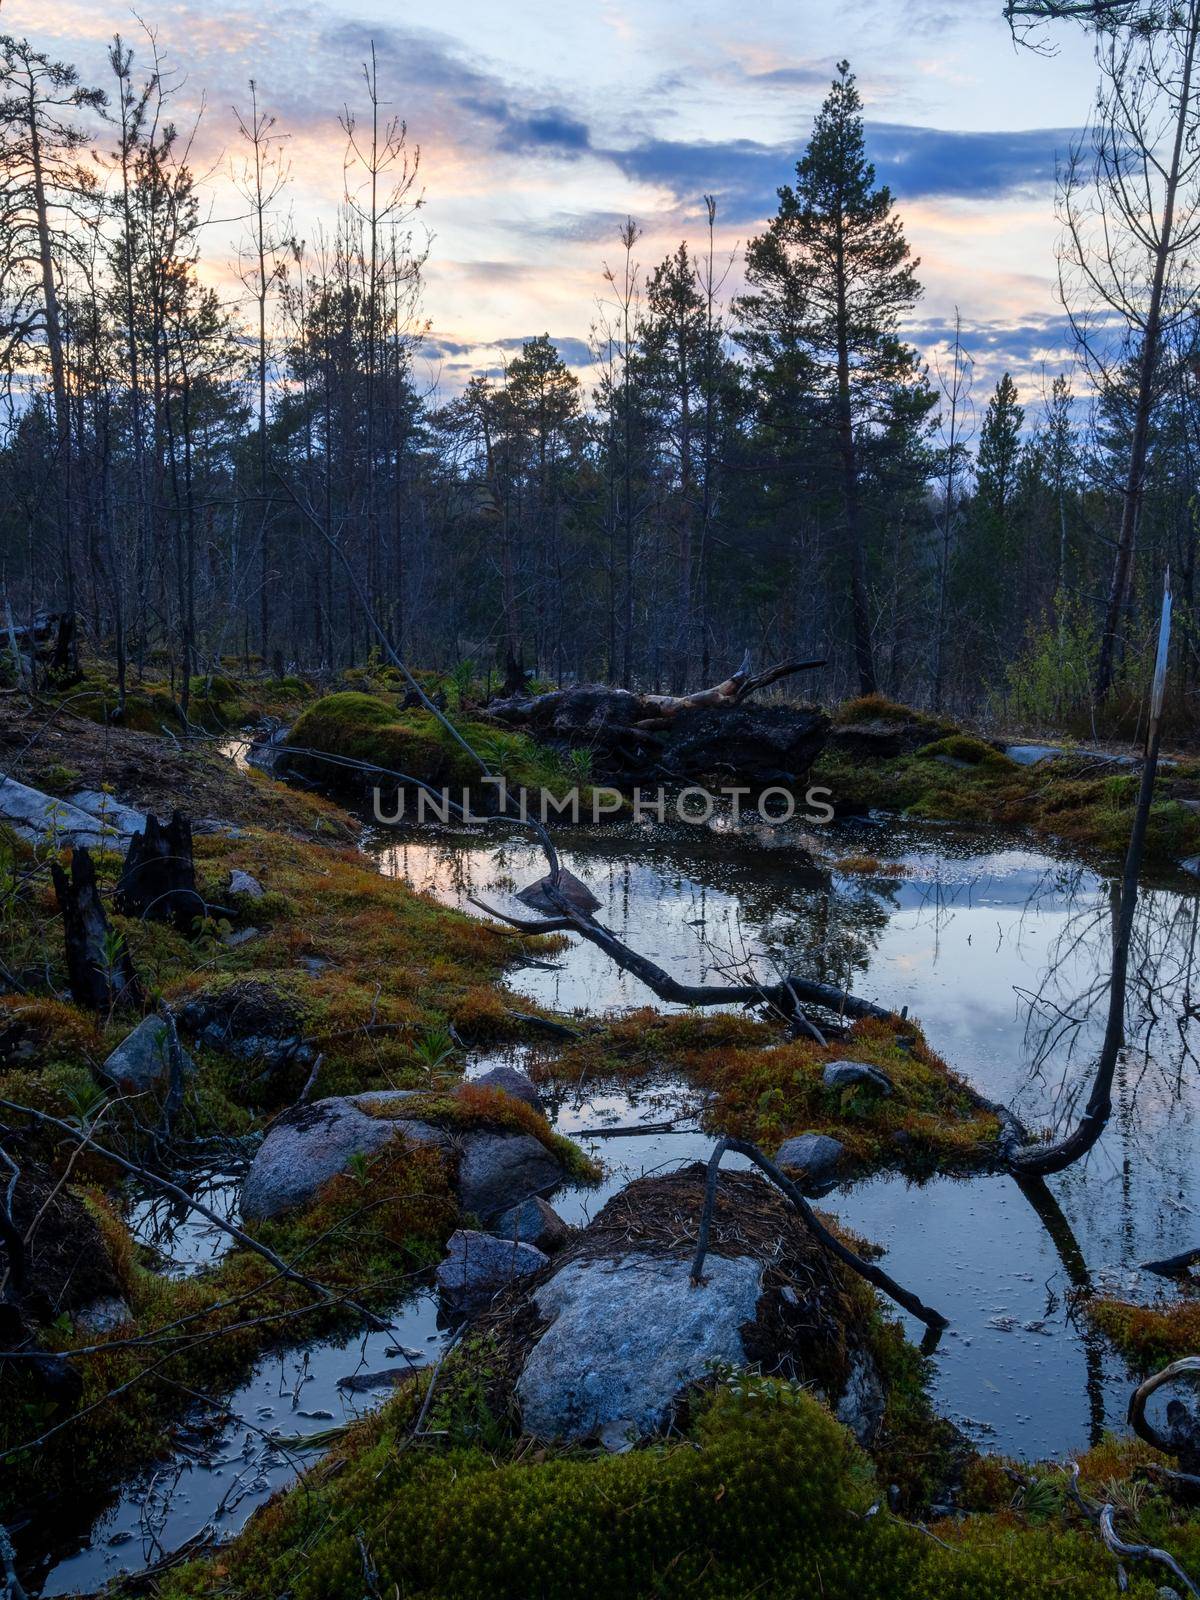 Landscape of the Karelian forest. Two stumps by a small lake in the forest on a rocky massif. by Andre1ns